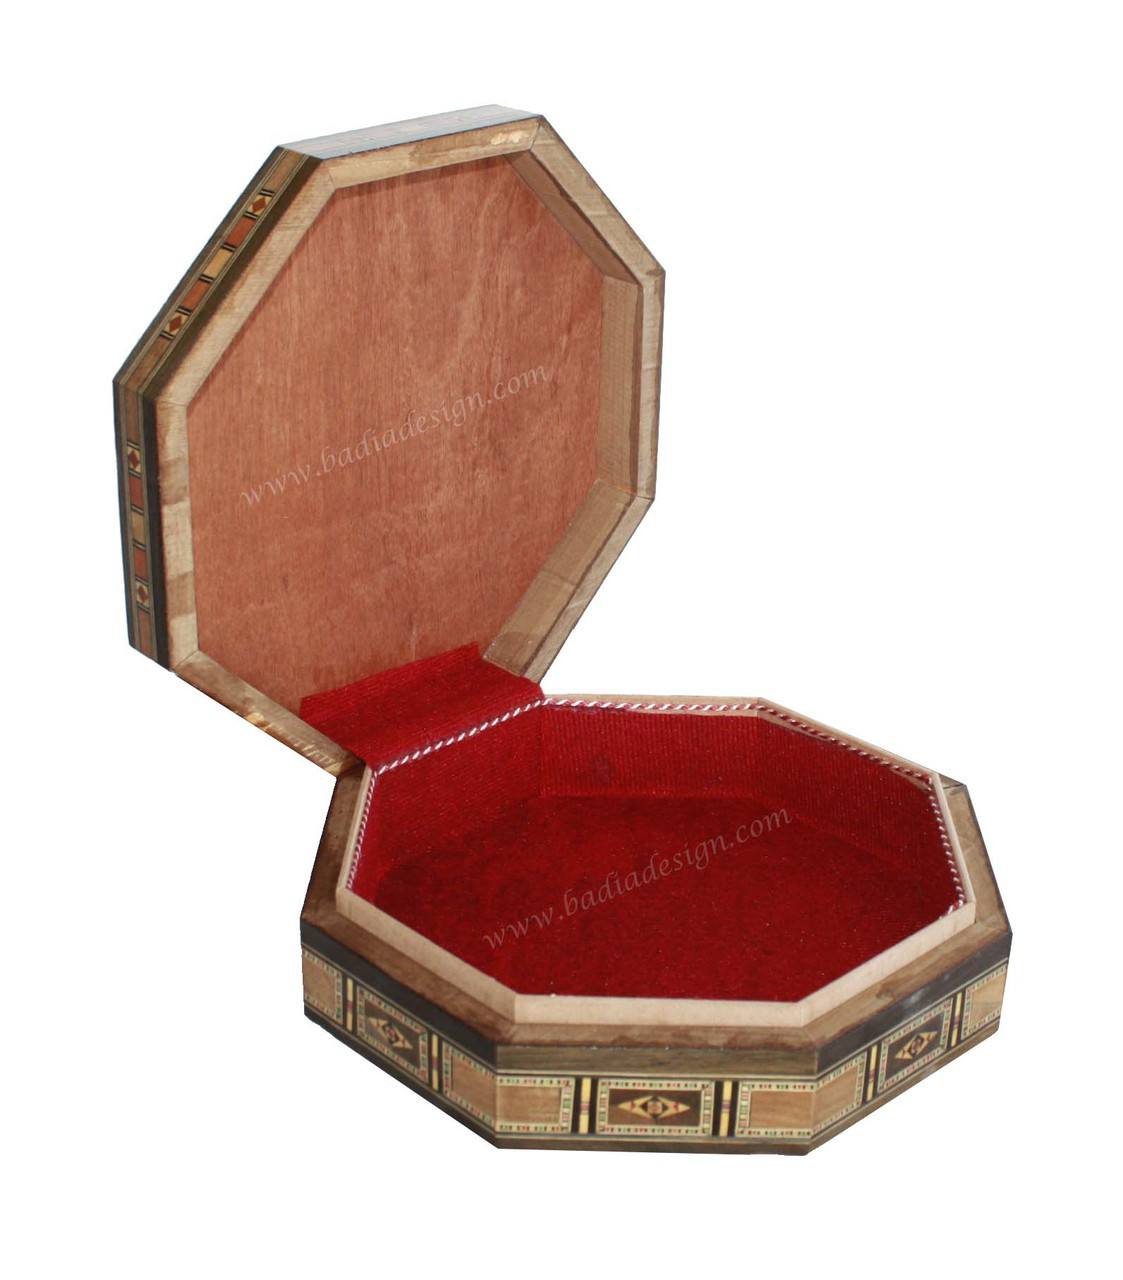 Octagonal Shaped Inlaid Wooden Jewelry Box - HD162